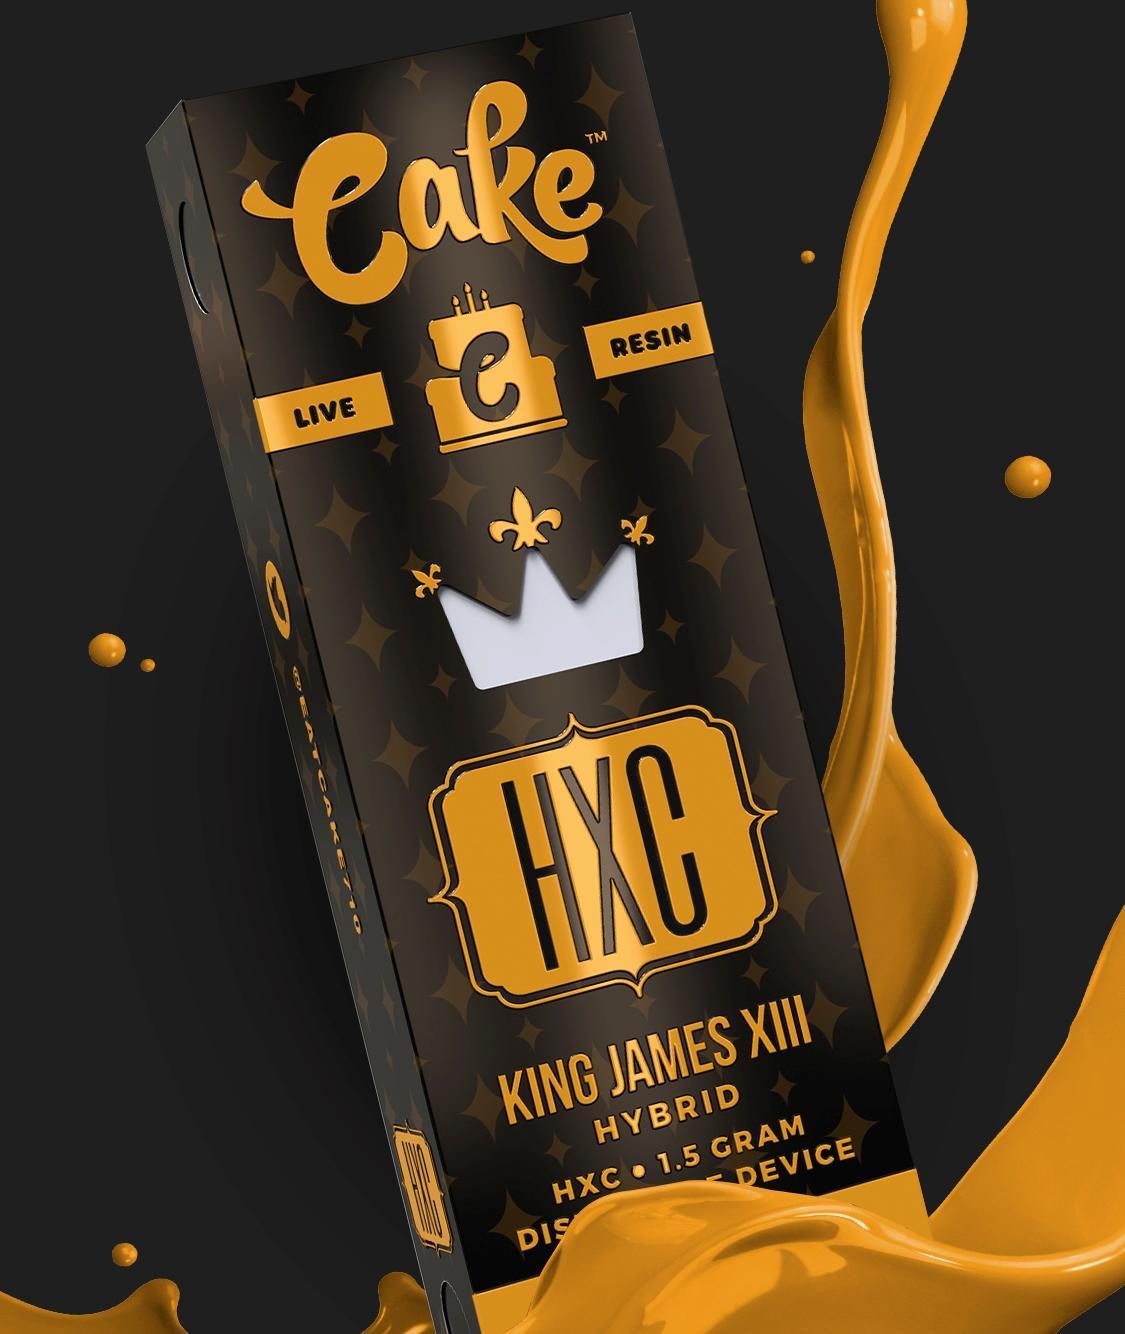 Cake HXC/HHC with Live Resin “King James XIII” Disposable Vape